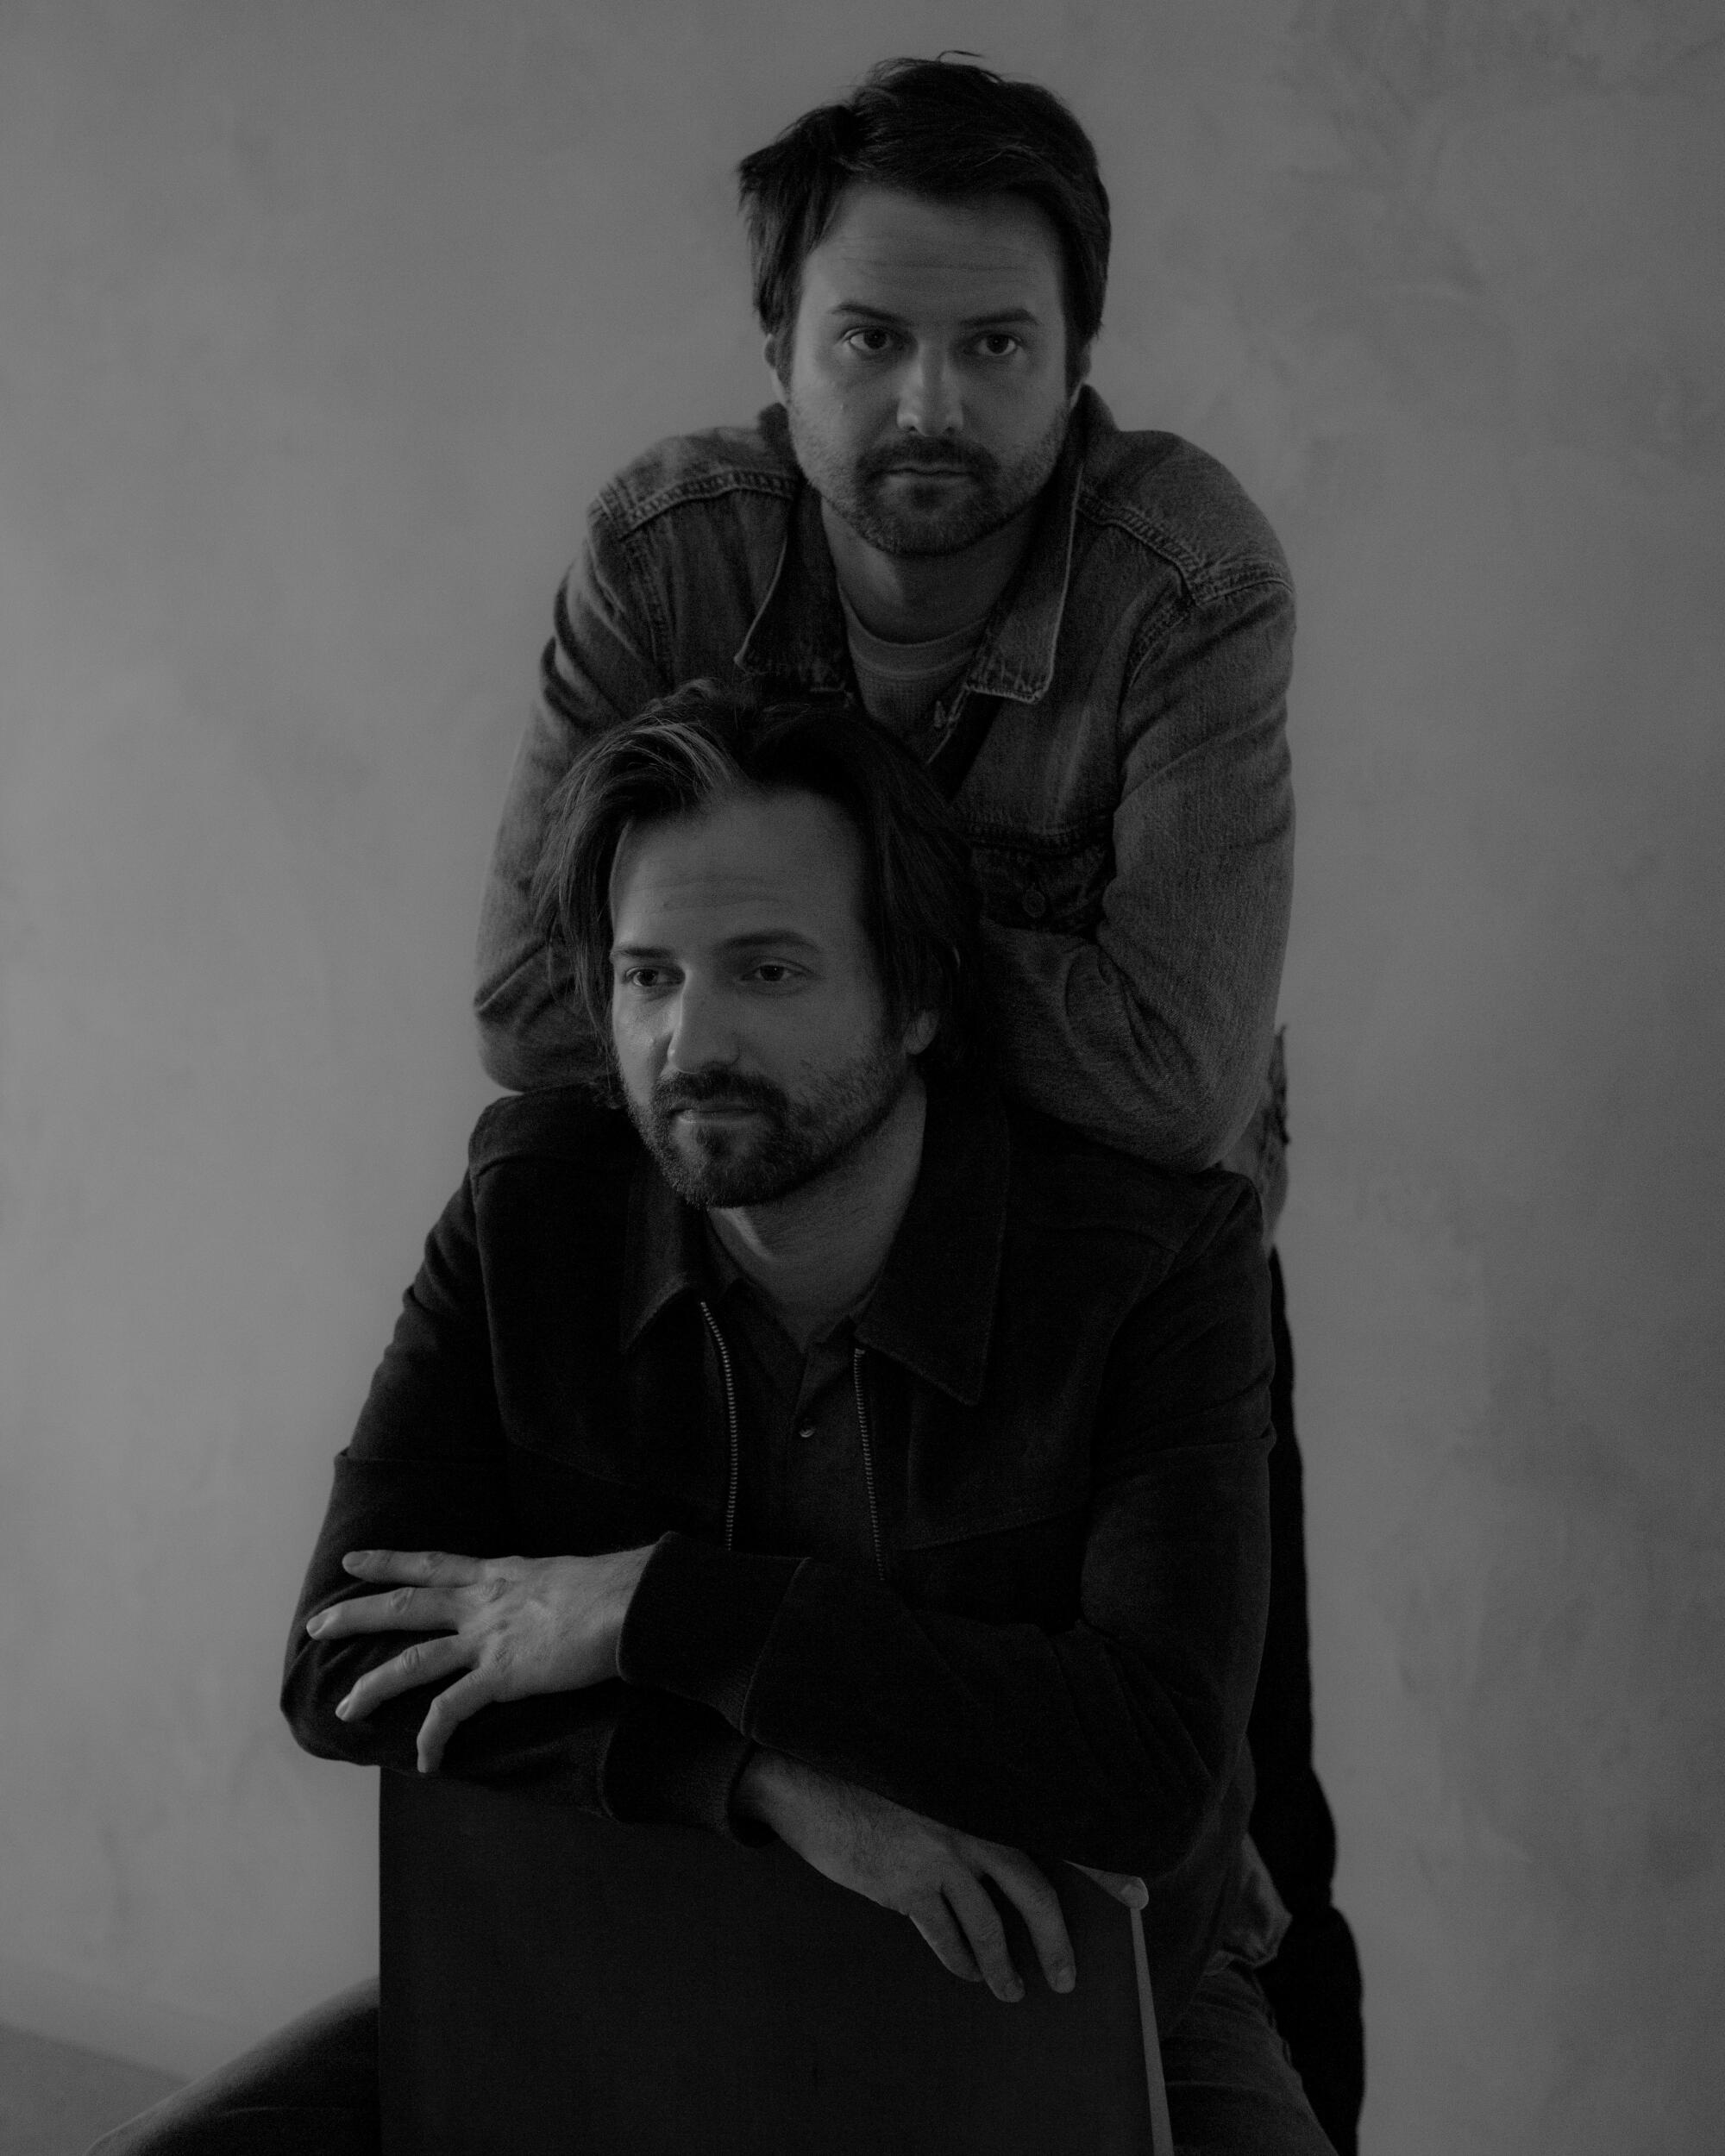 Two men pose for a portrait, one seated and the other leaning on his back